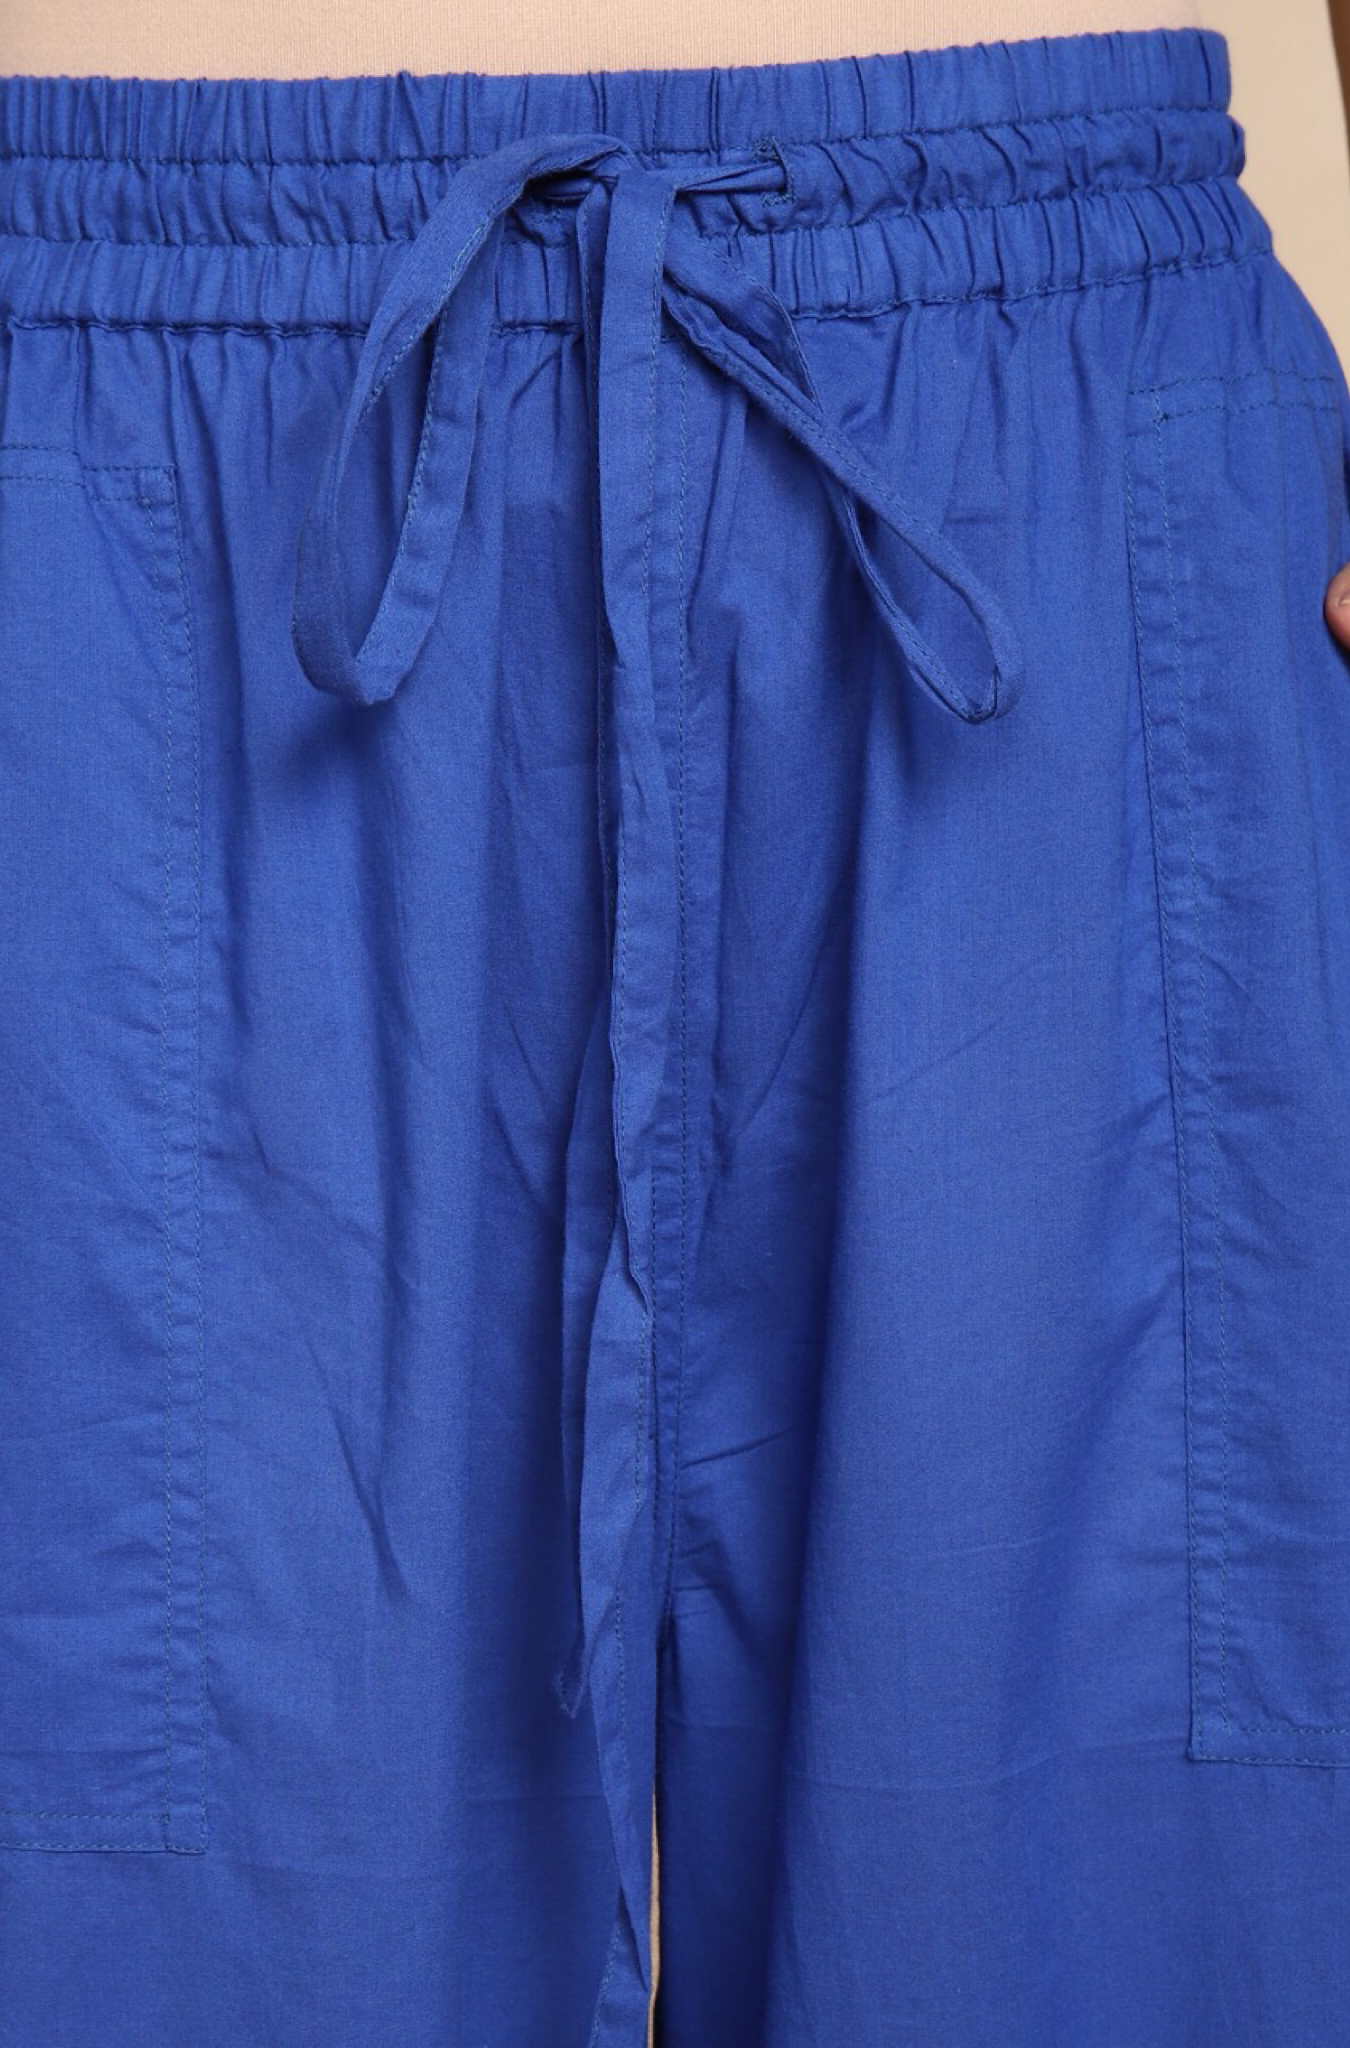 ELASTICATED CAMBRIC PANTS - INK BLUE